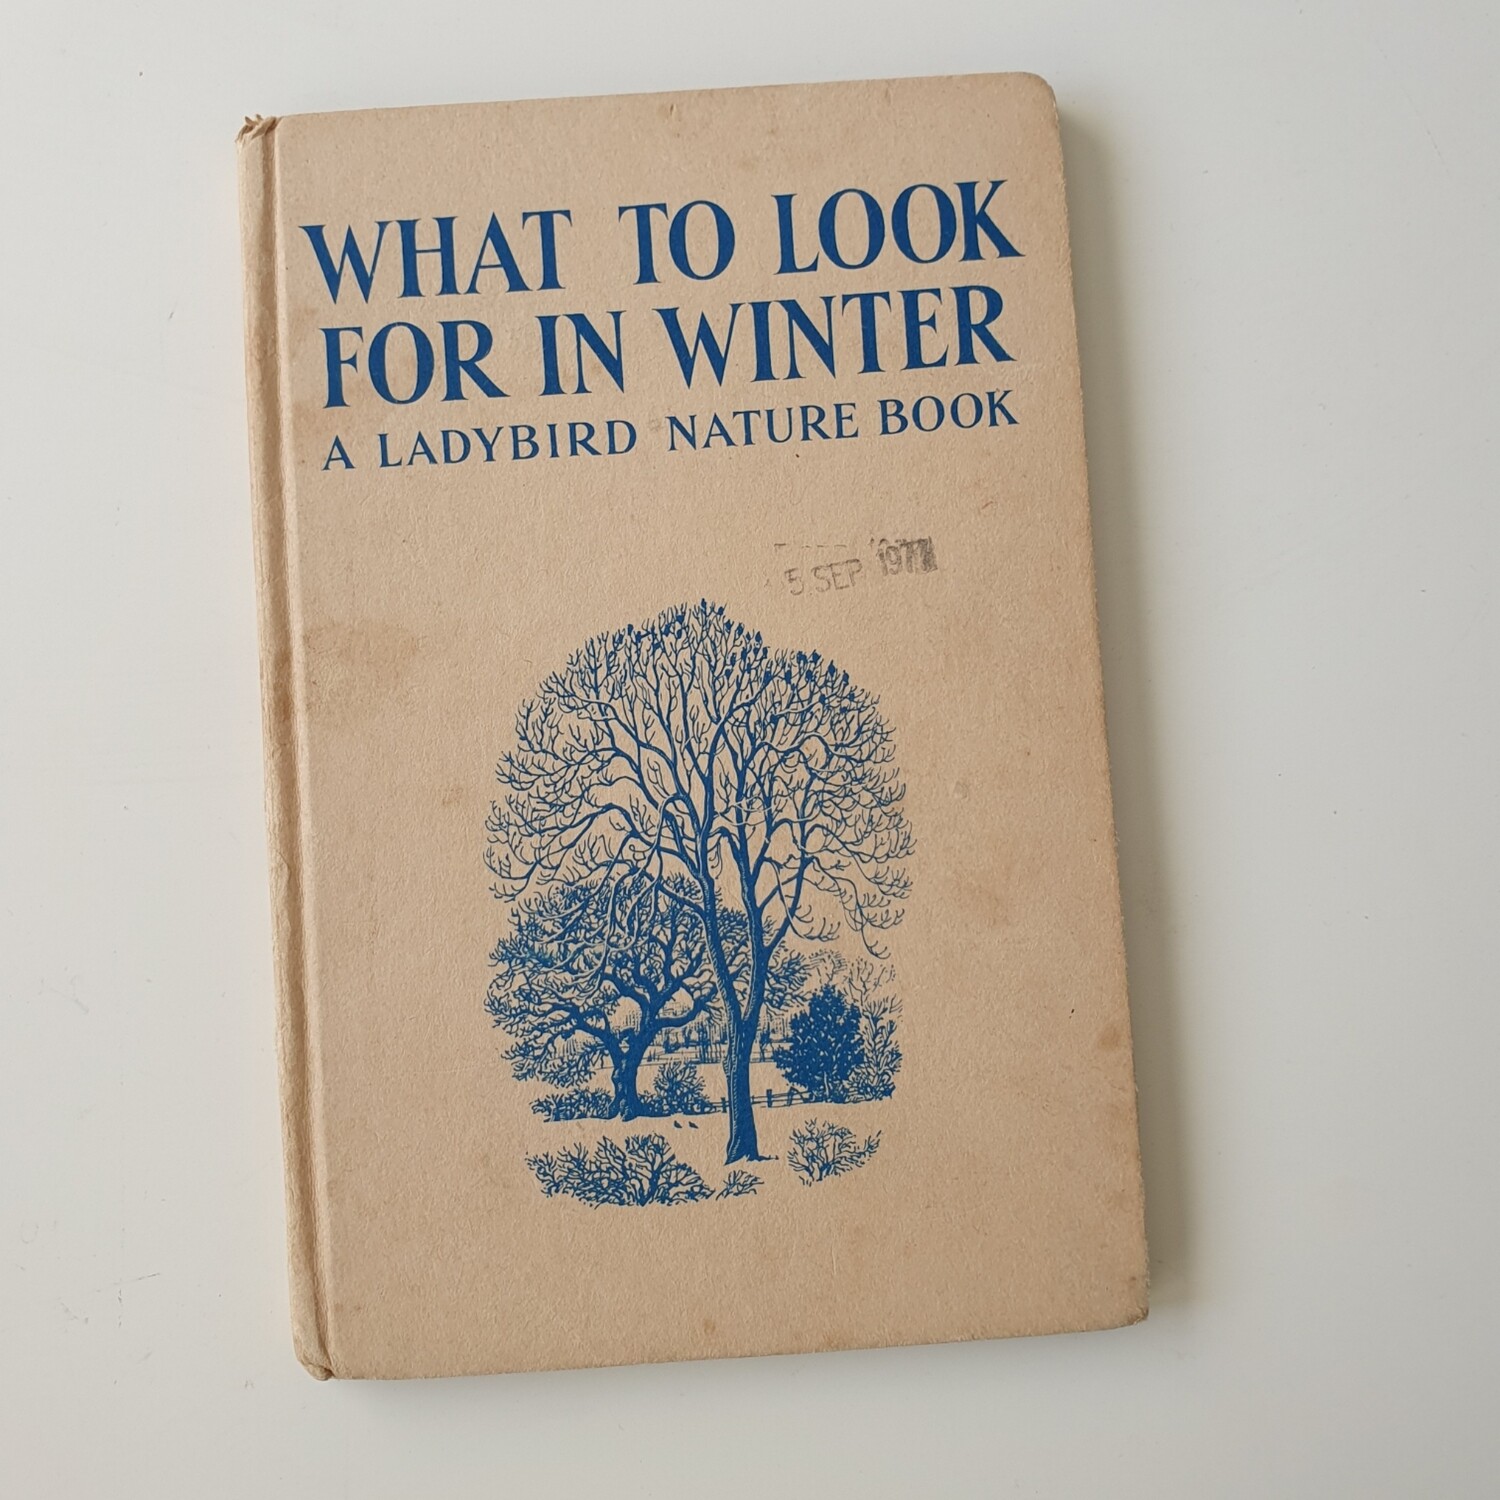 What to look for in Winter - tree